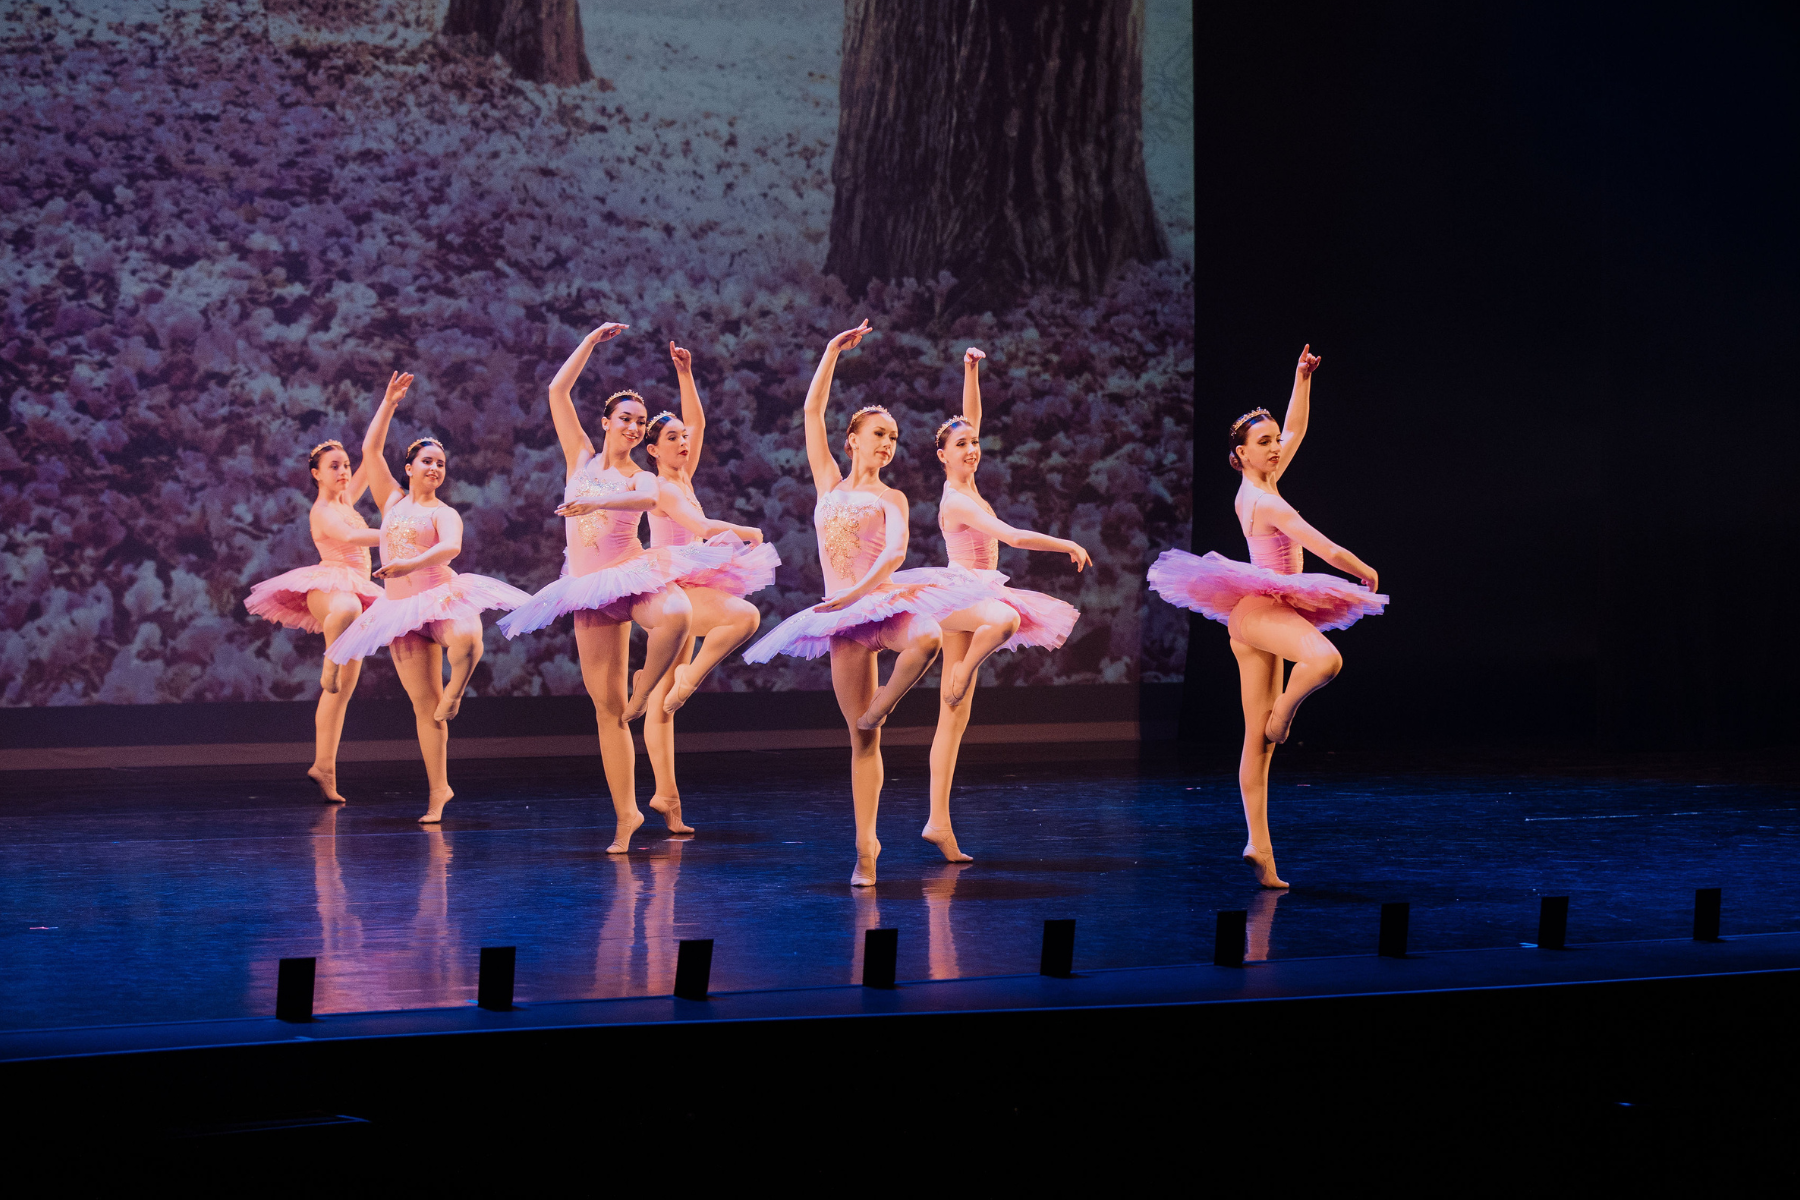 Six dancers performing a ballet routine